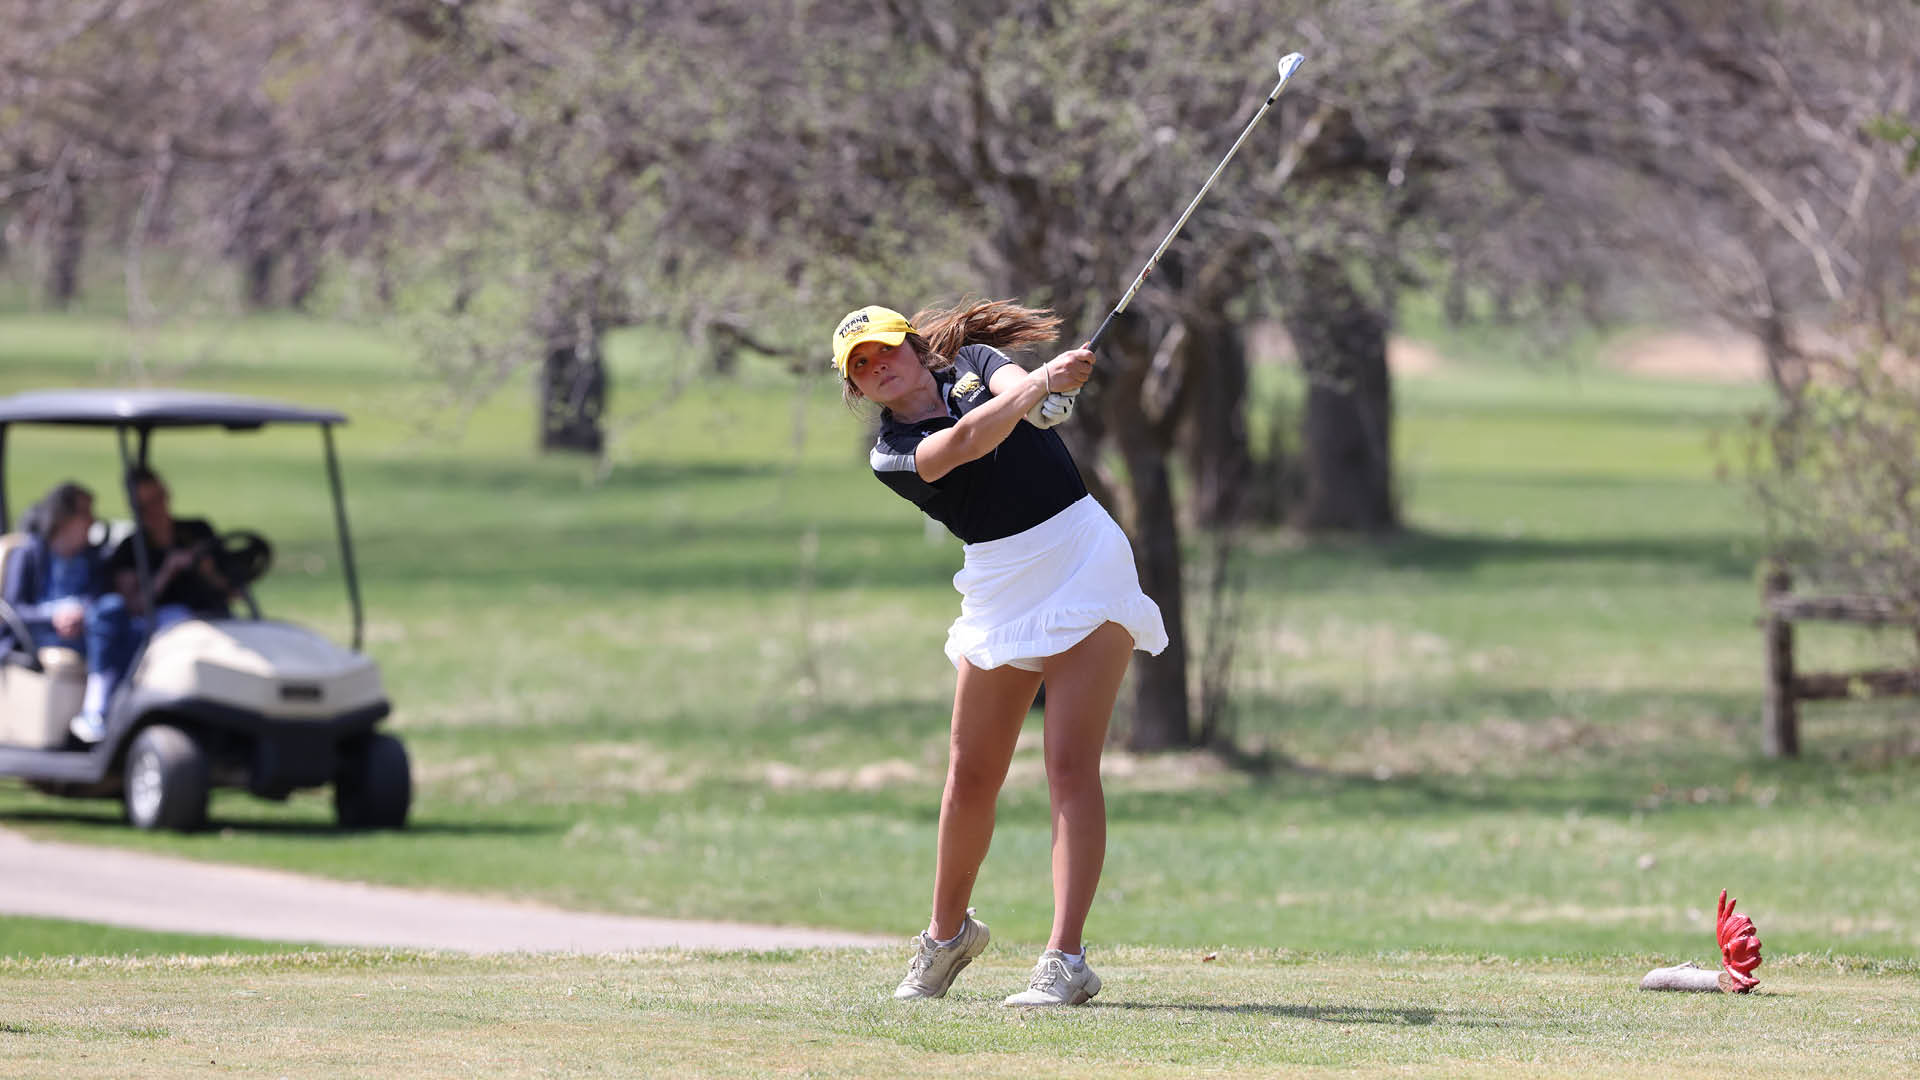 Titans Take Second at Match Play Event